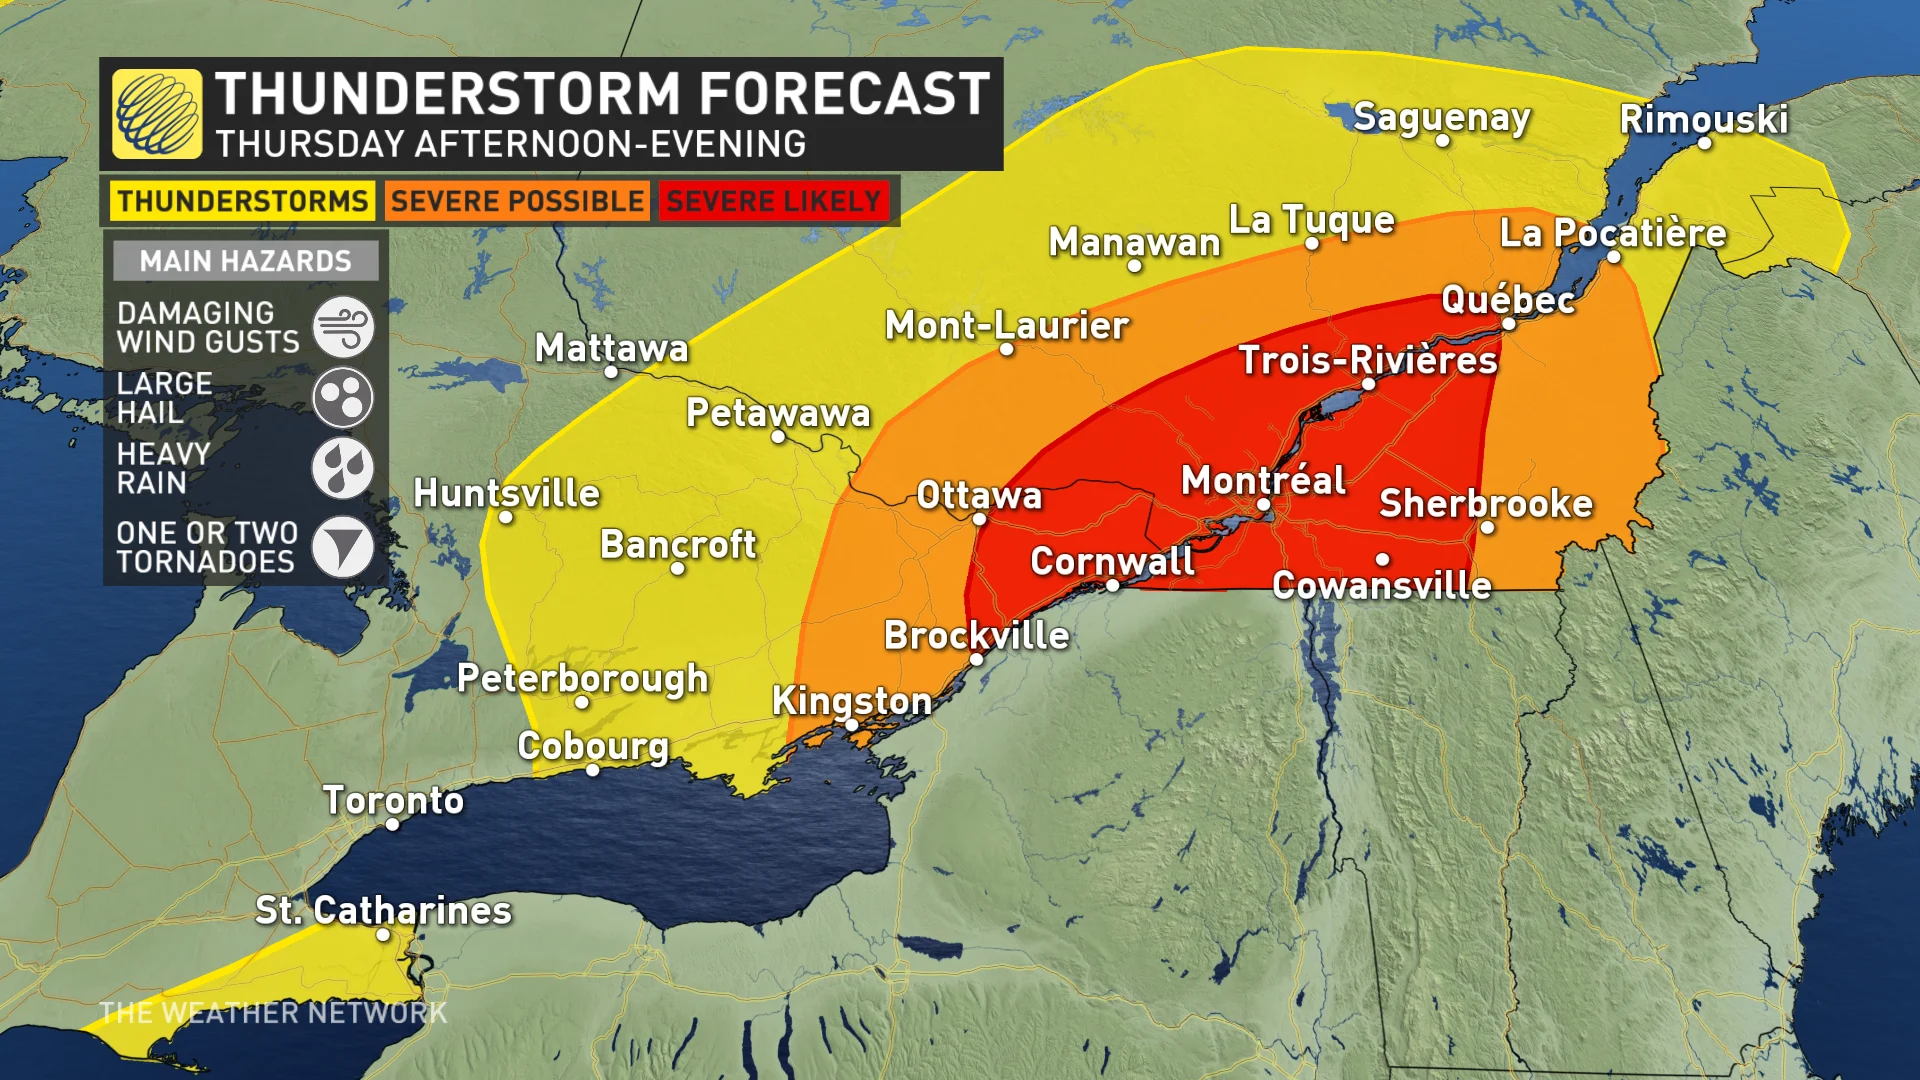 Baron - ONQC storm risk - updated - July13.jpg